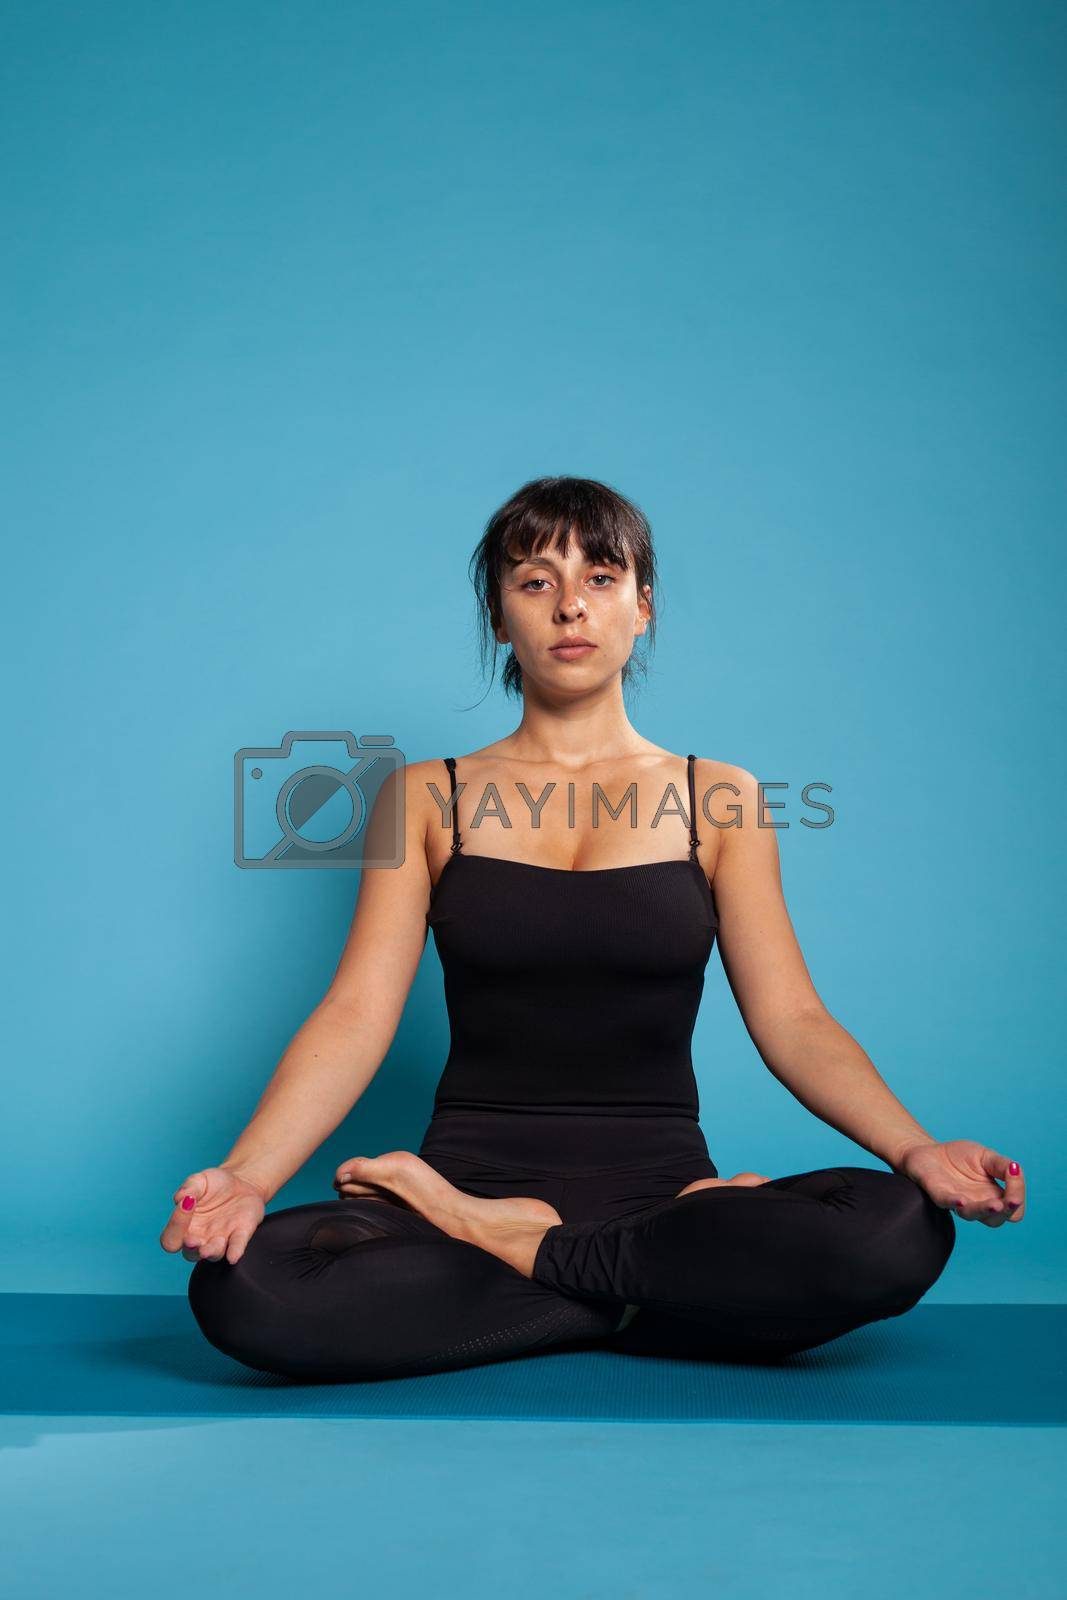 Personal trainer sitting on yoga mat in lotus position meditating during fitness workout. Athlete woman working at body posture practicing spiritual meditation. Concept of fitness exercise